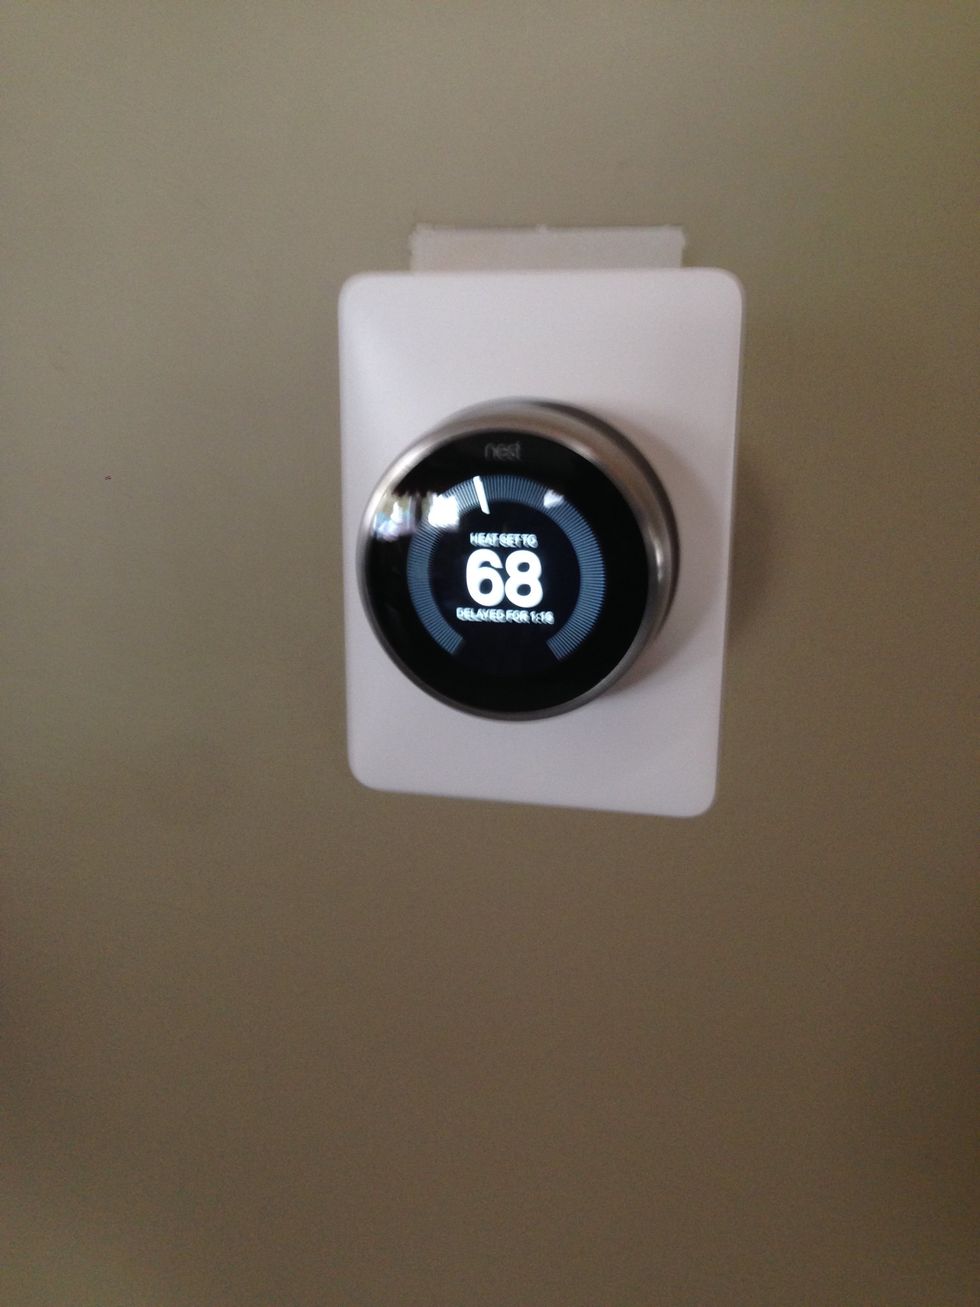 Vivint installed Nest Pro Thermostat on a wall.